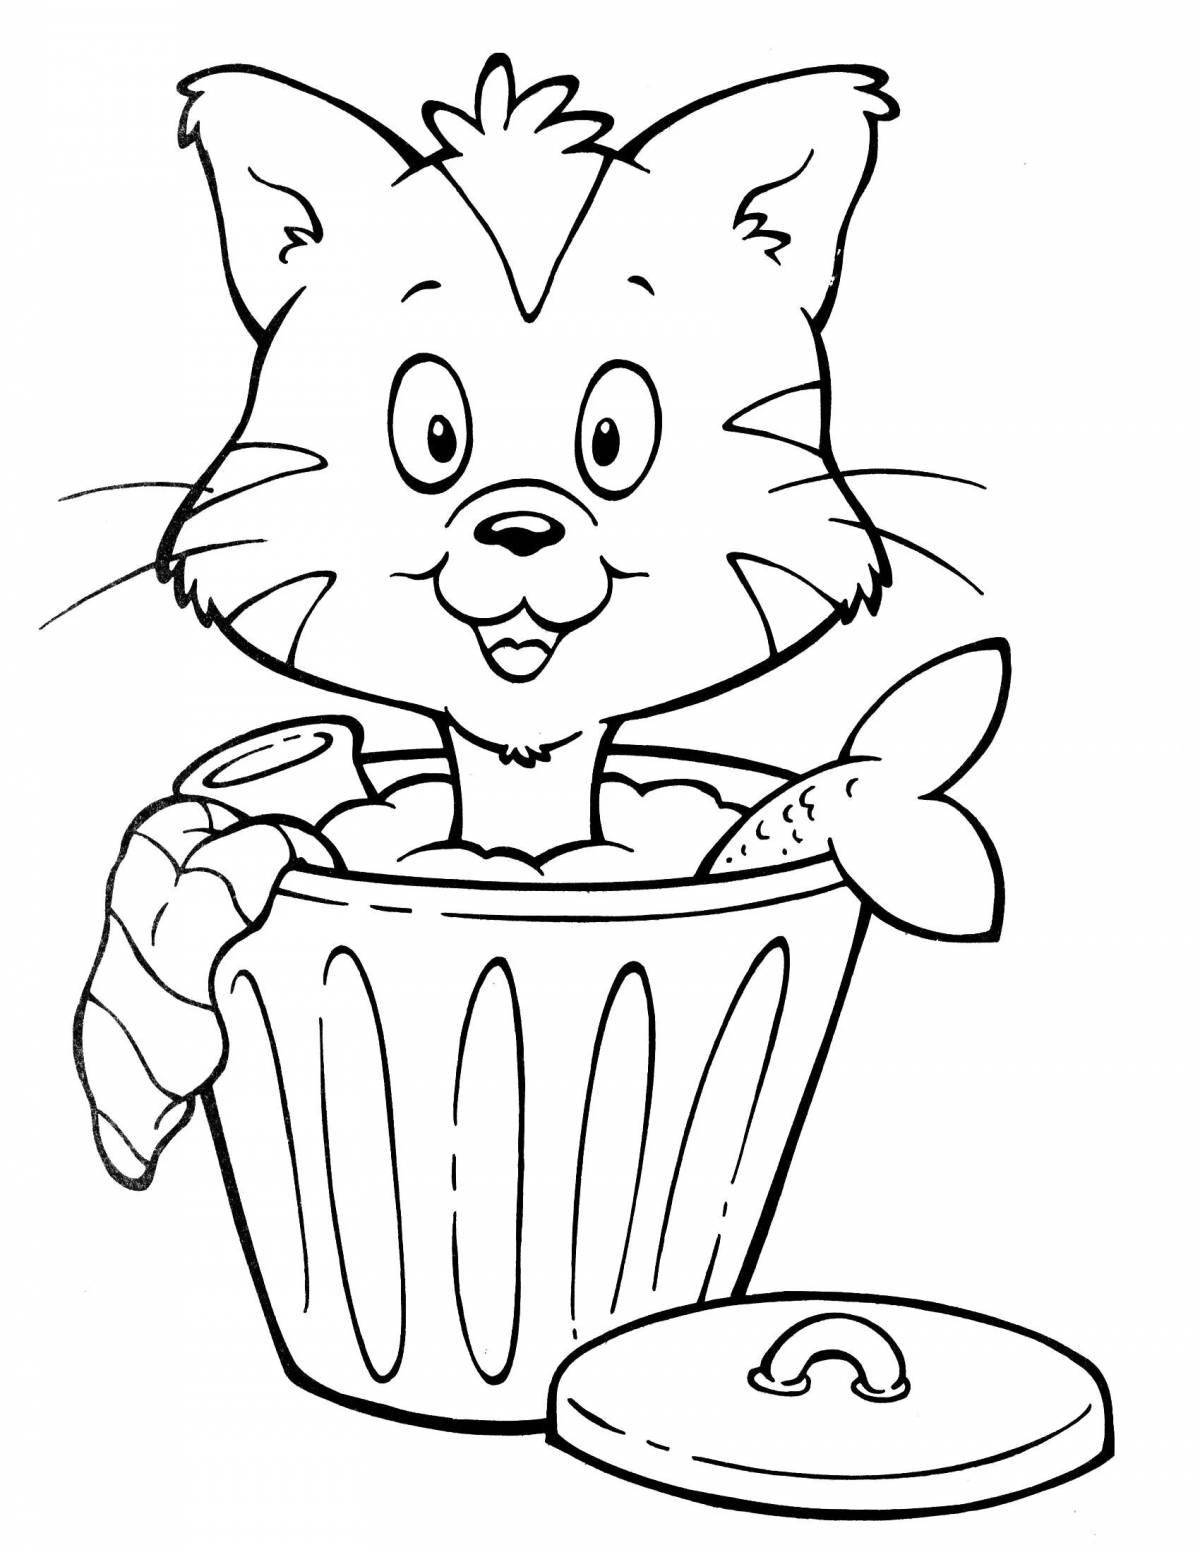 Coloring page enchanted cat drinking milk